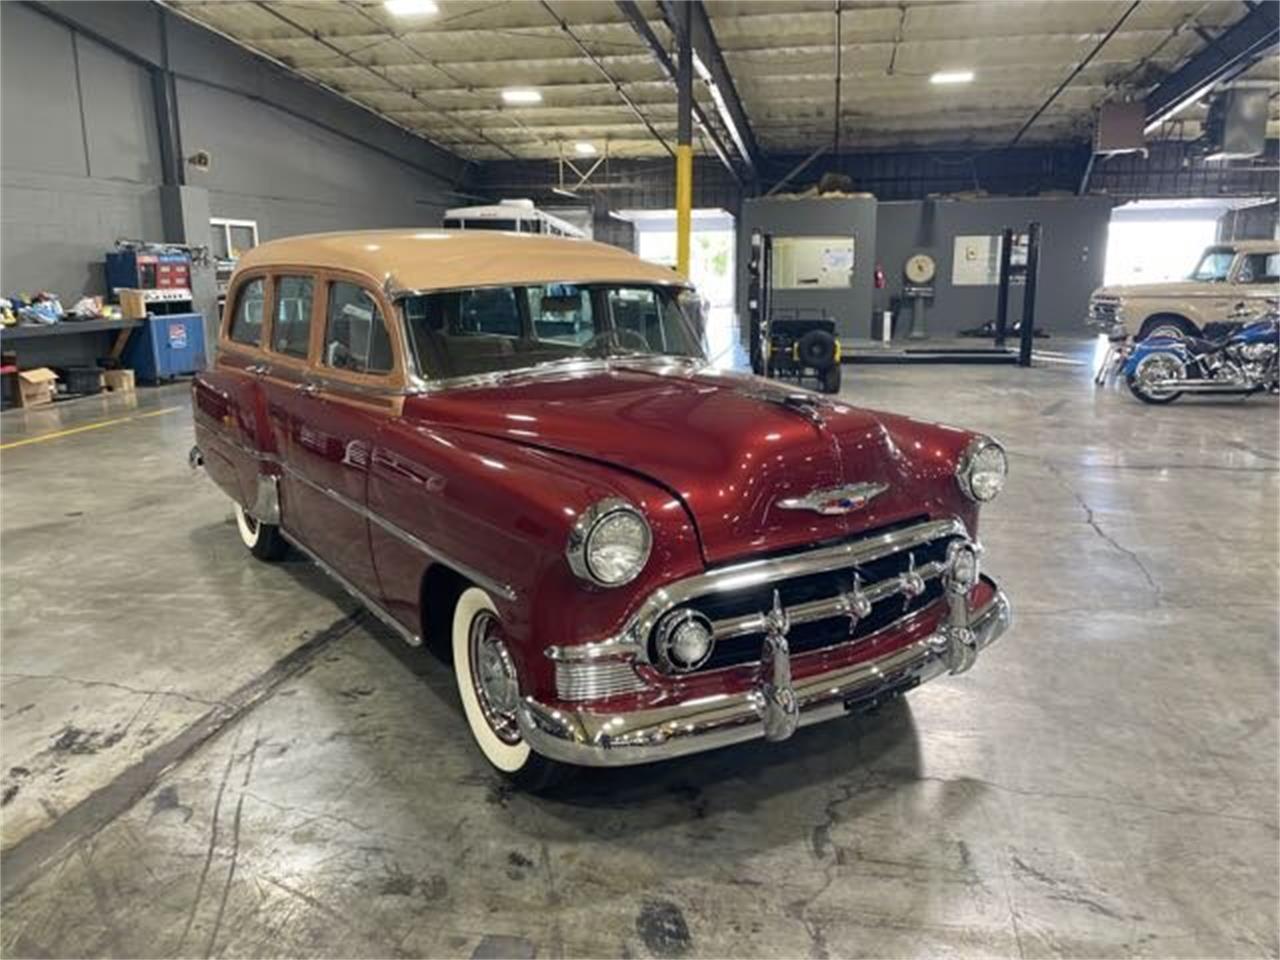 For Sale: 1953 Chevrolet Townsman in Knoxville, Tennessee for sale in Knoxville, TN